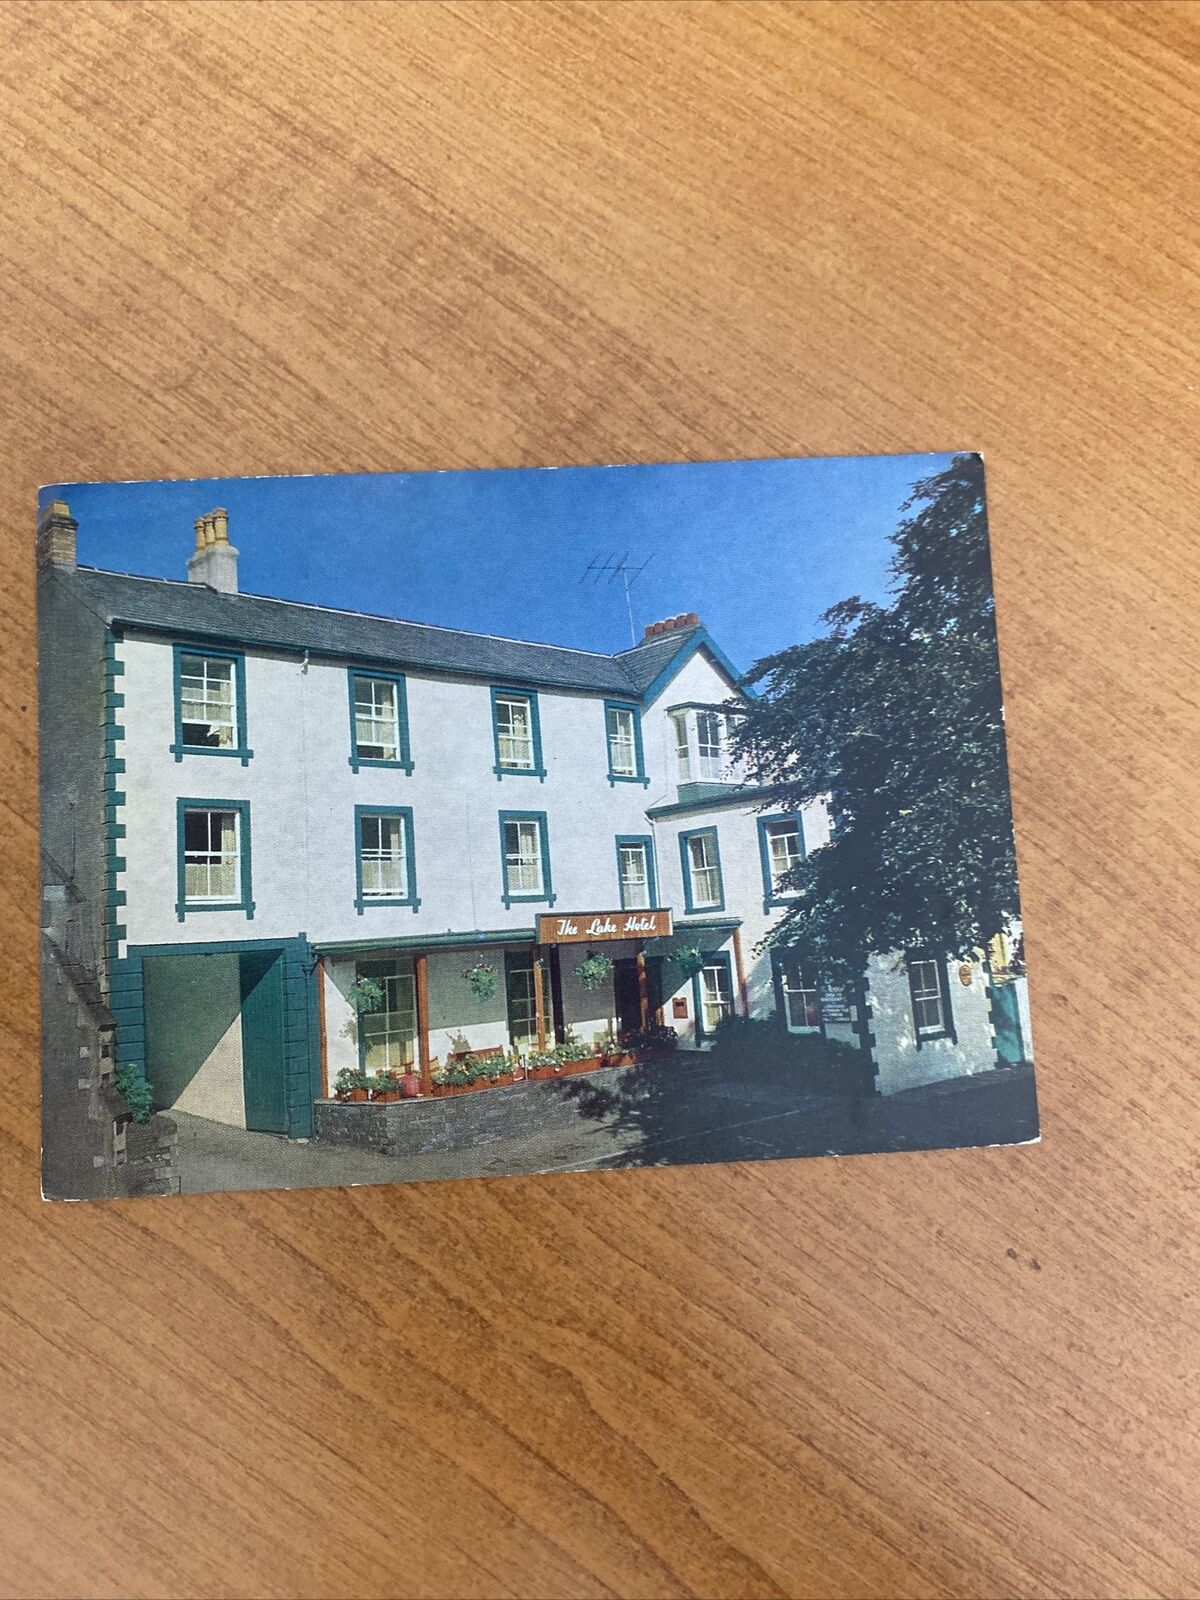 House Clearance - The Lark Hotel, Keswick-on-Derwentwater, Cumbria RP Service Unposted